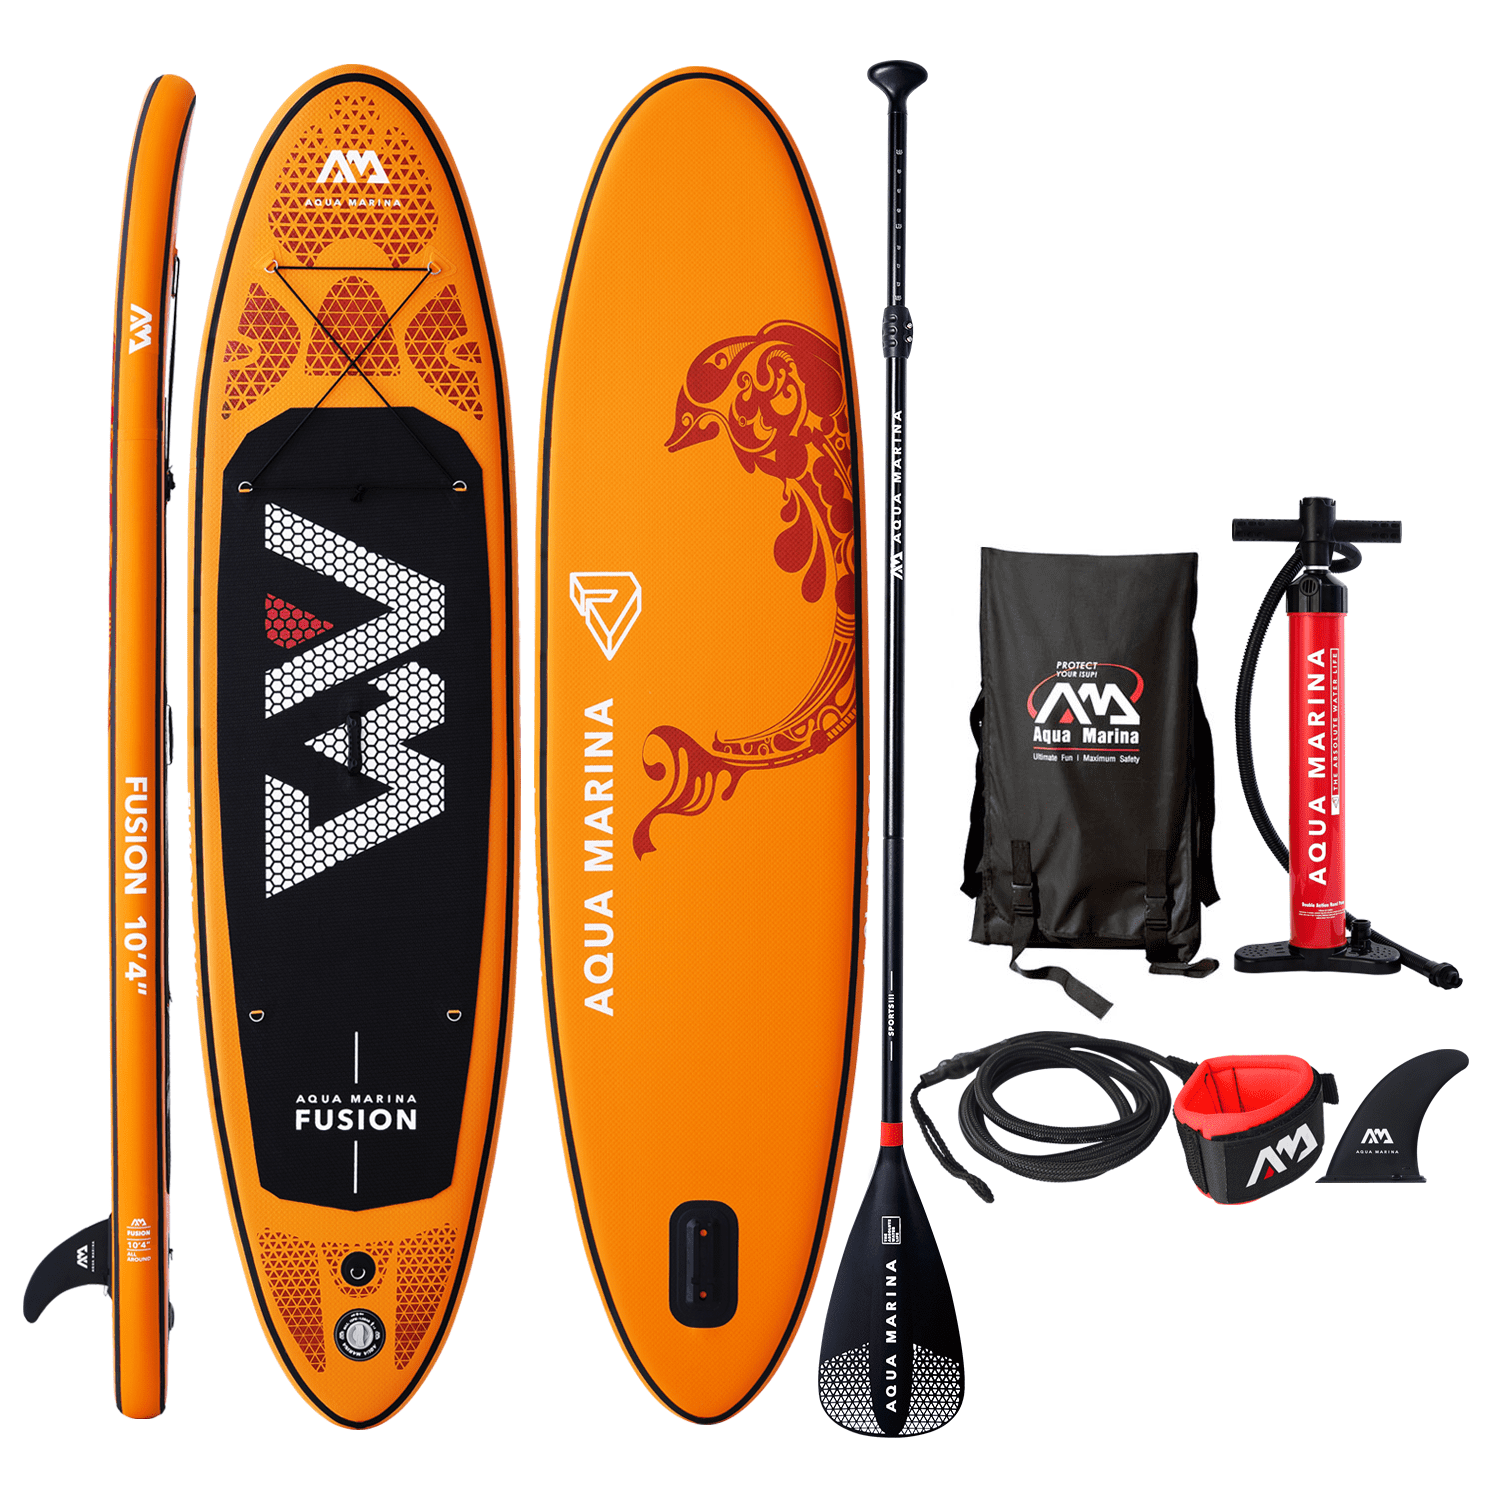 Aqua Marina Inflatable Stand Up Paddle Board with Premium SUP ...